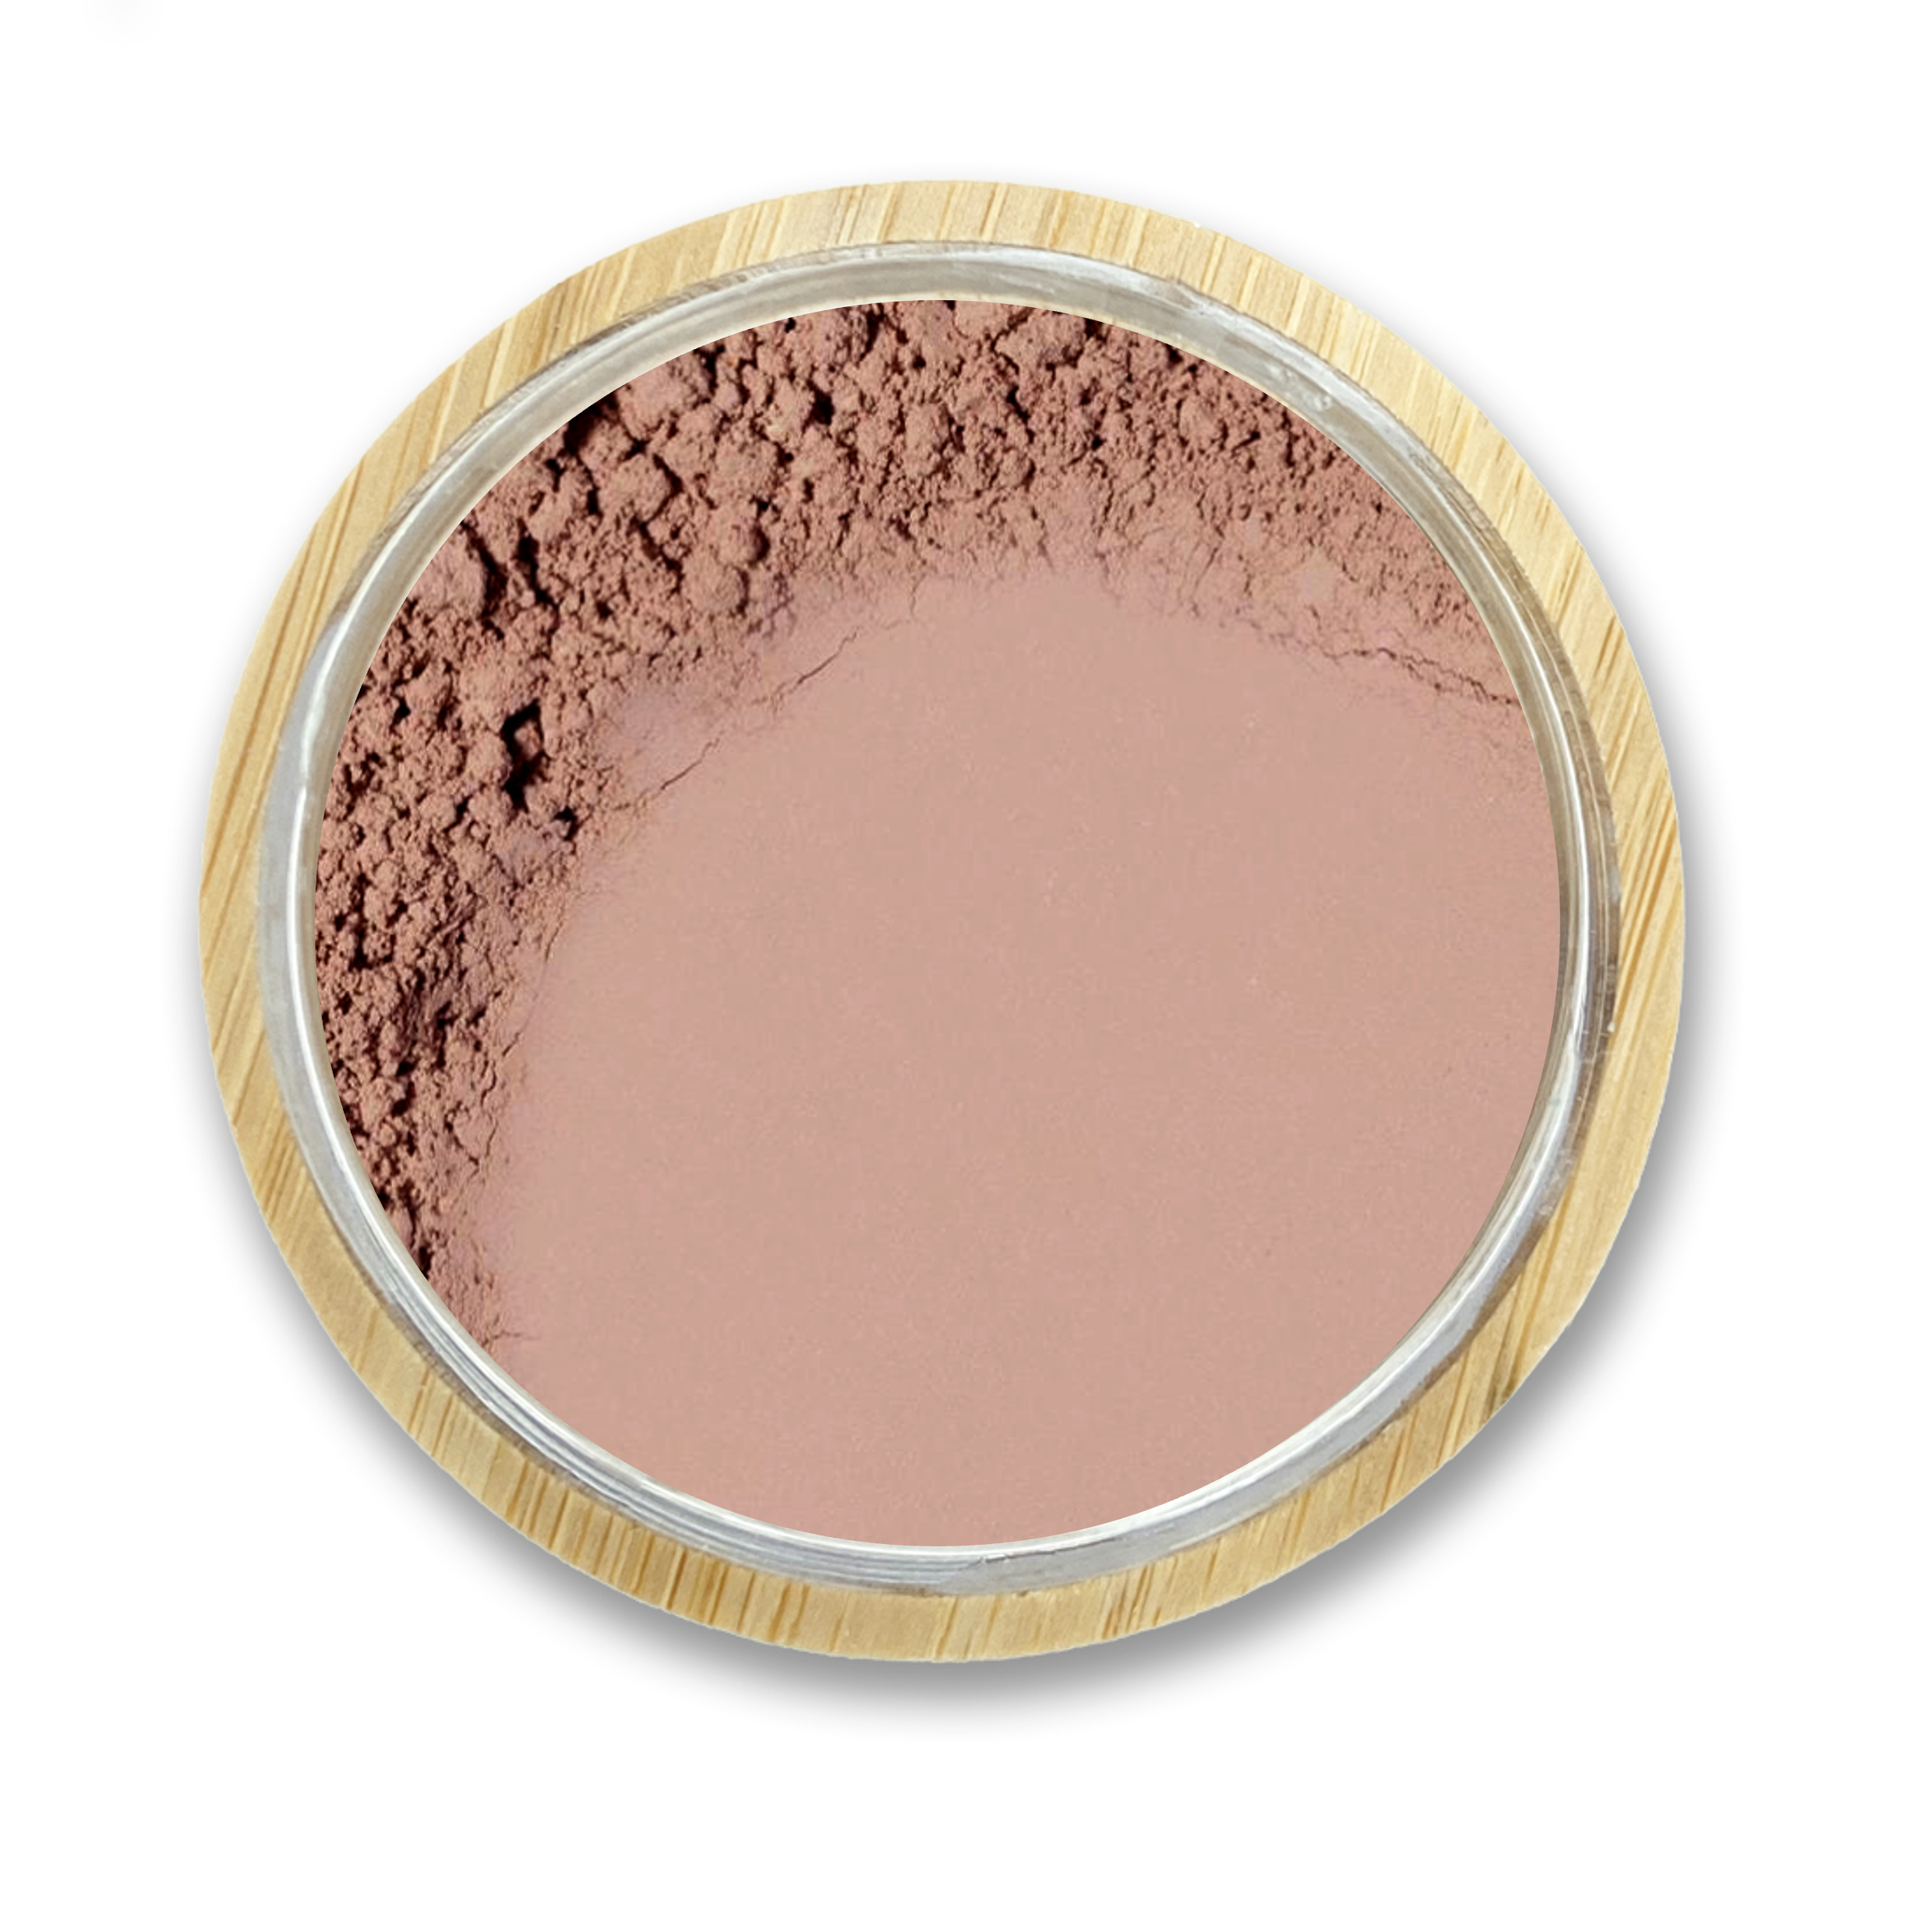 Loose Powder Mineral Bronzer - Without Mica, Titanium Dioxide, & More! - Omiana Beauty